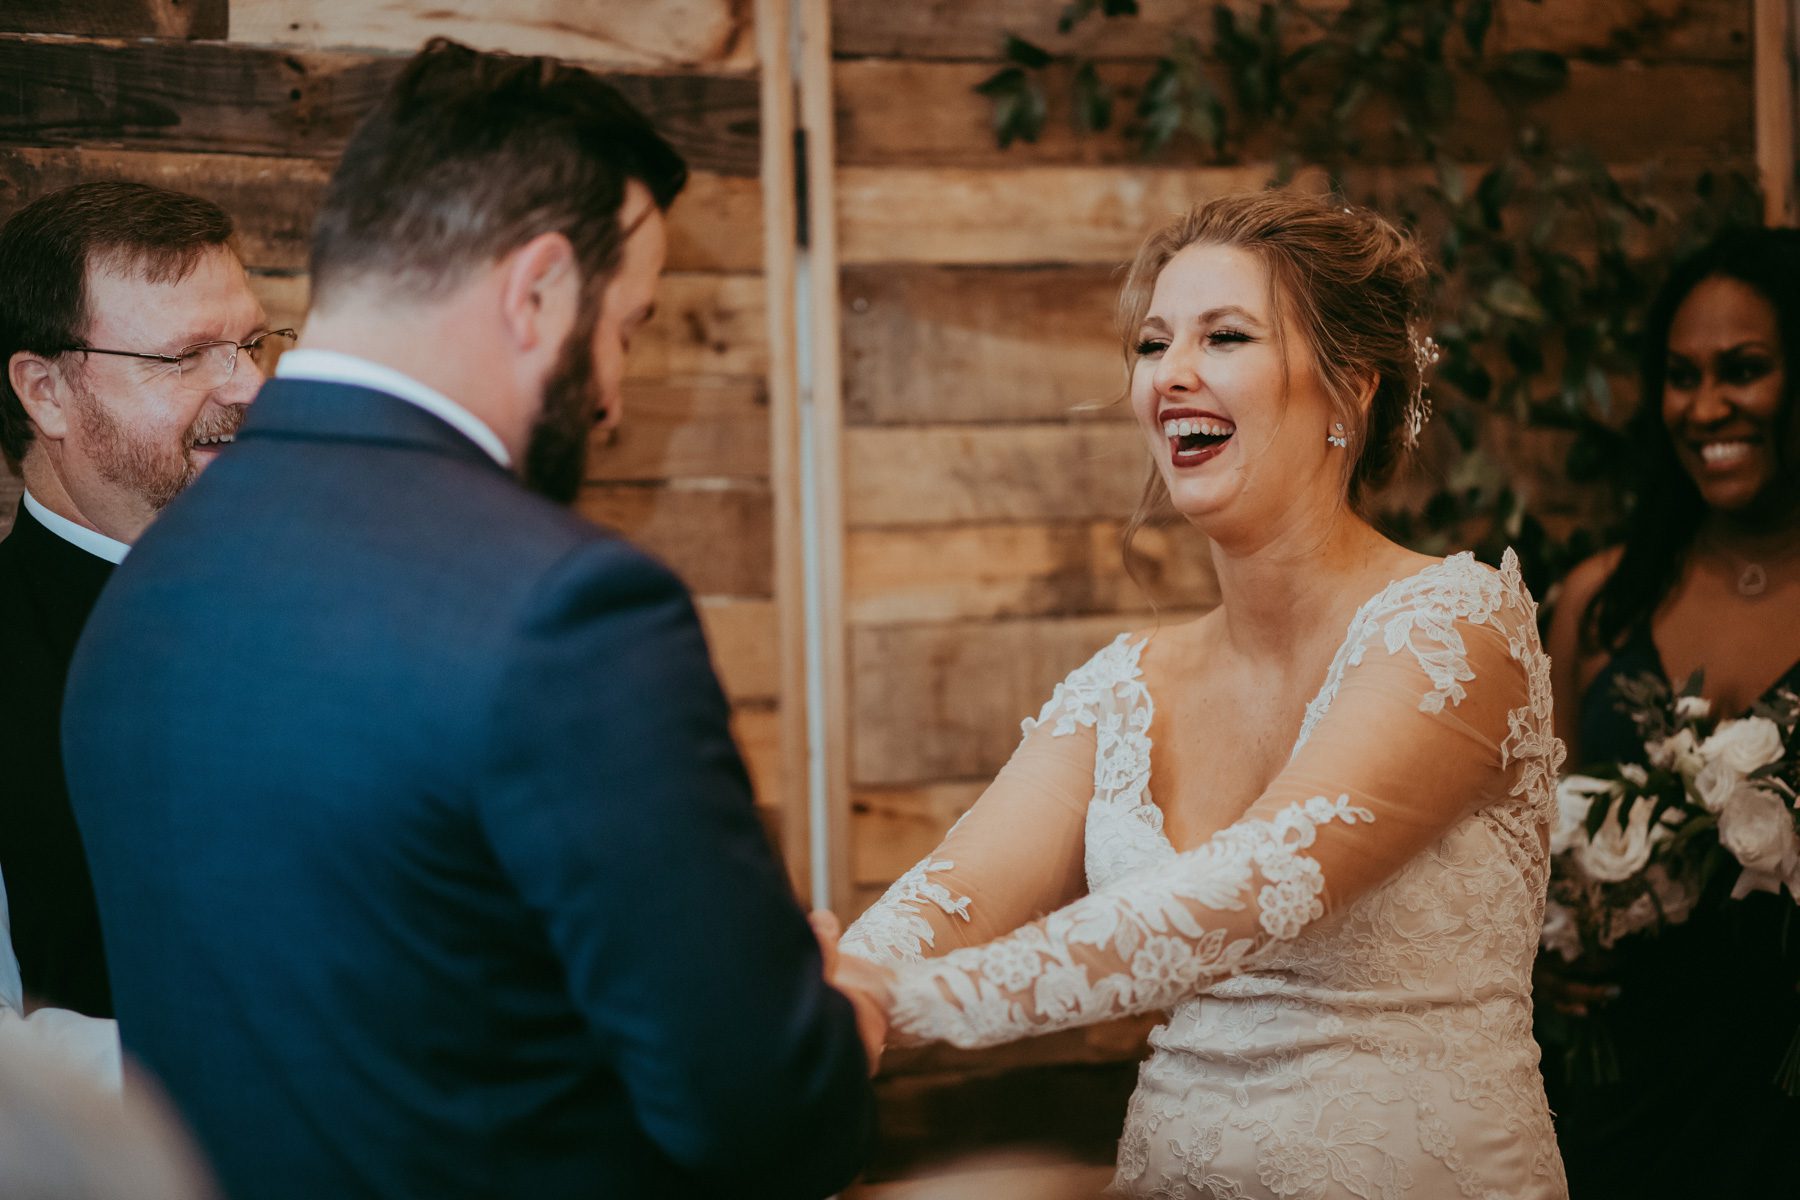 Bride sees groom for the first time on wedding day 